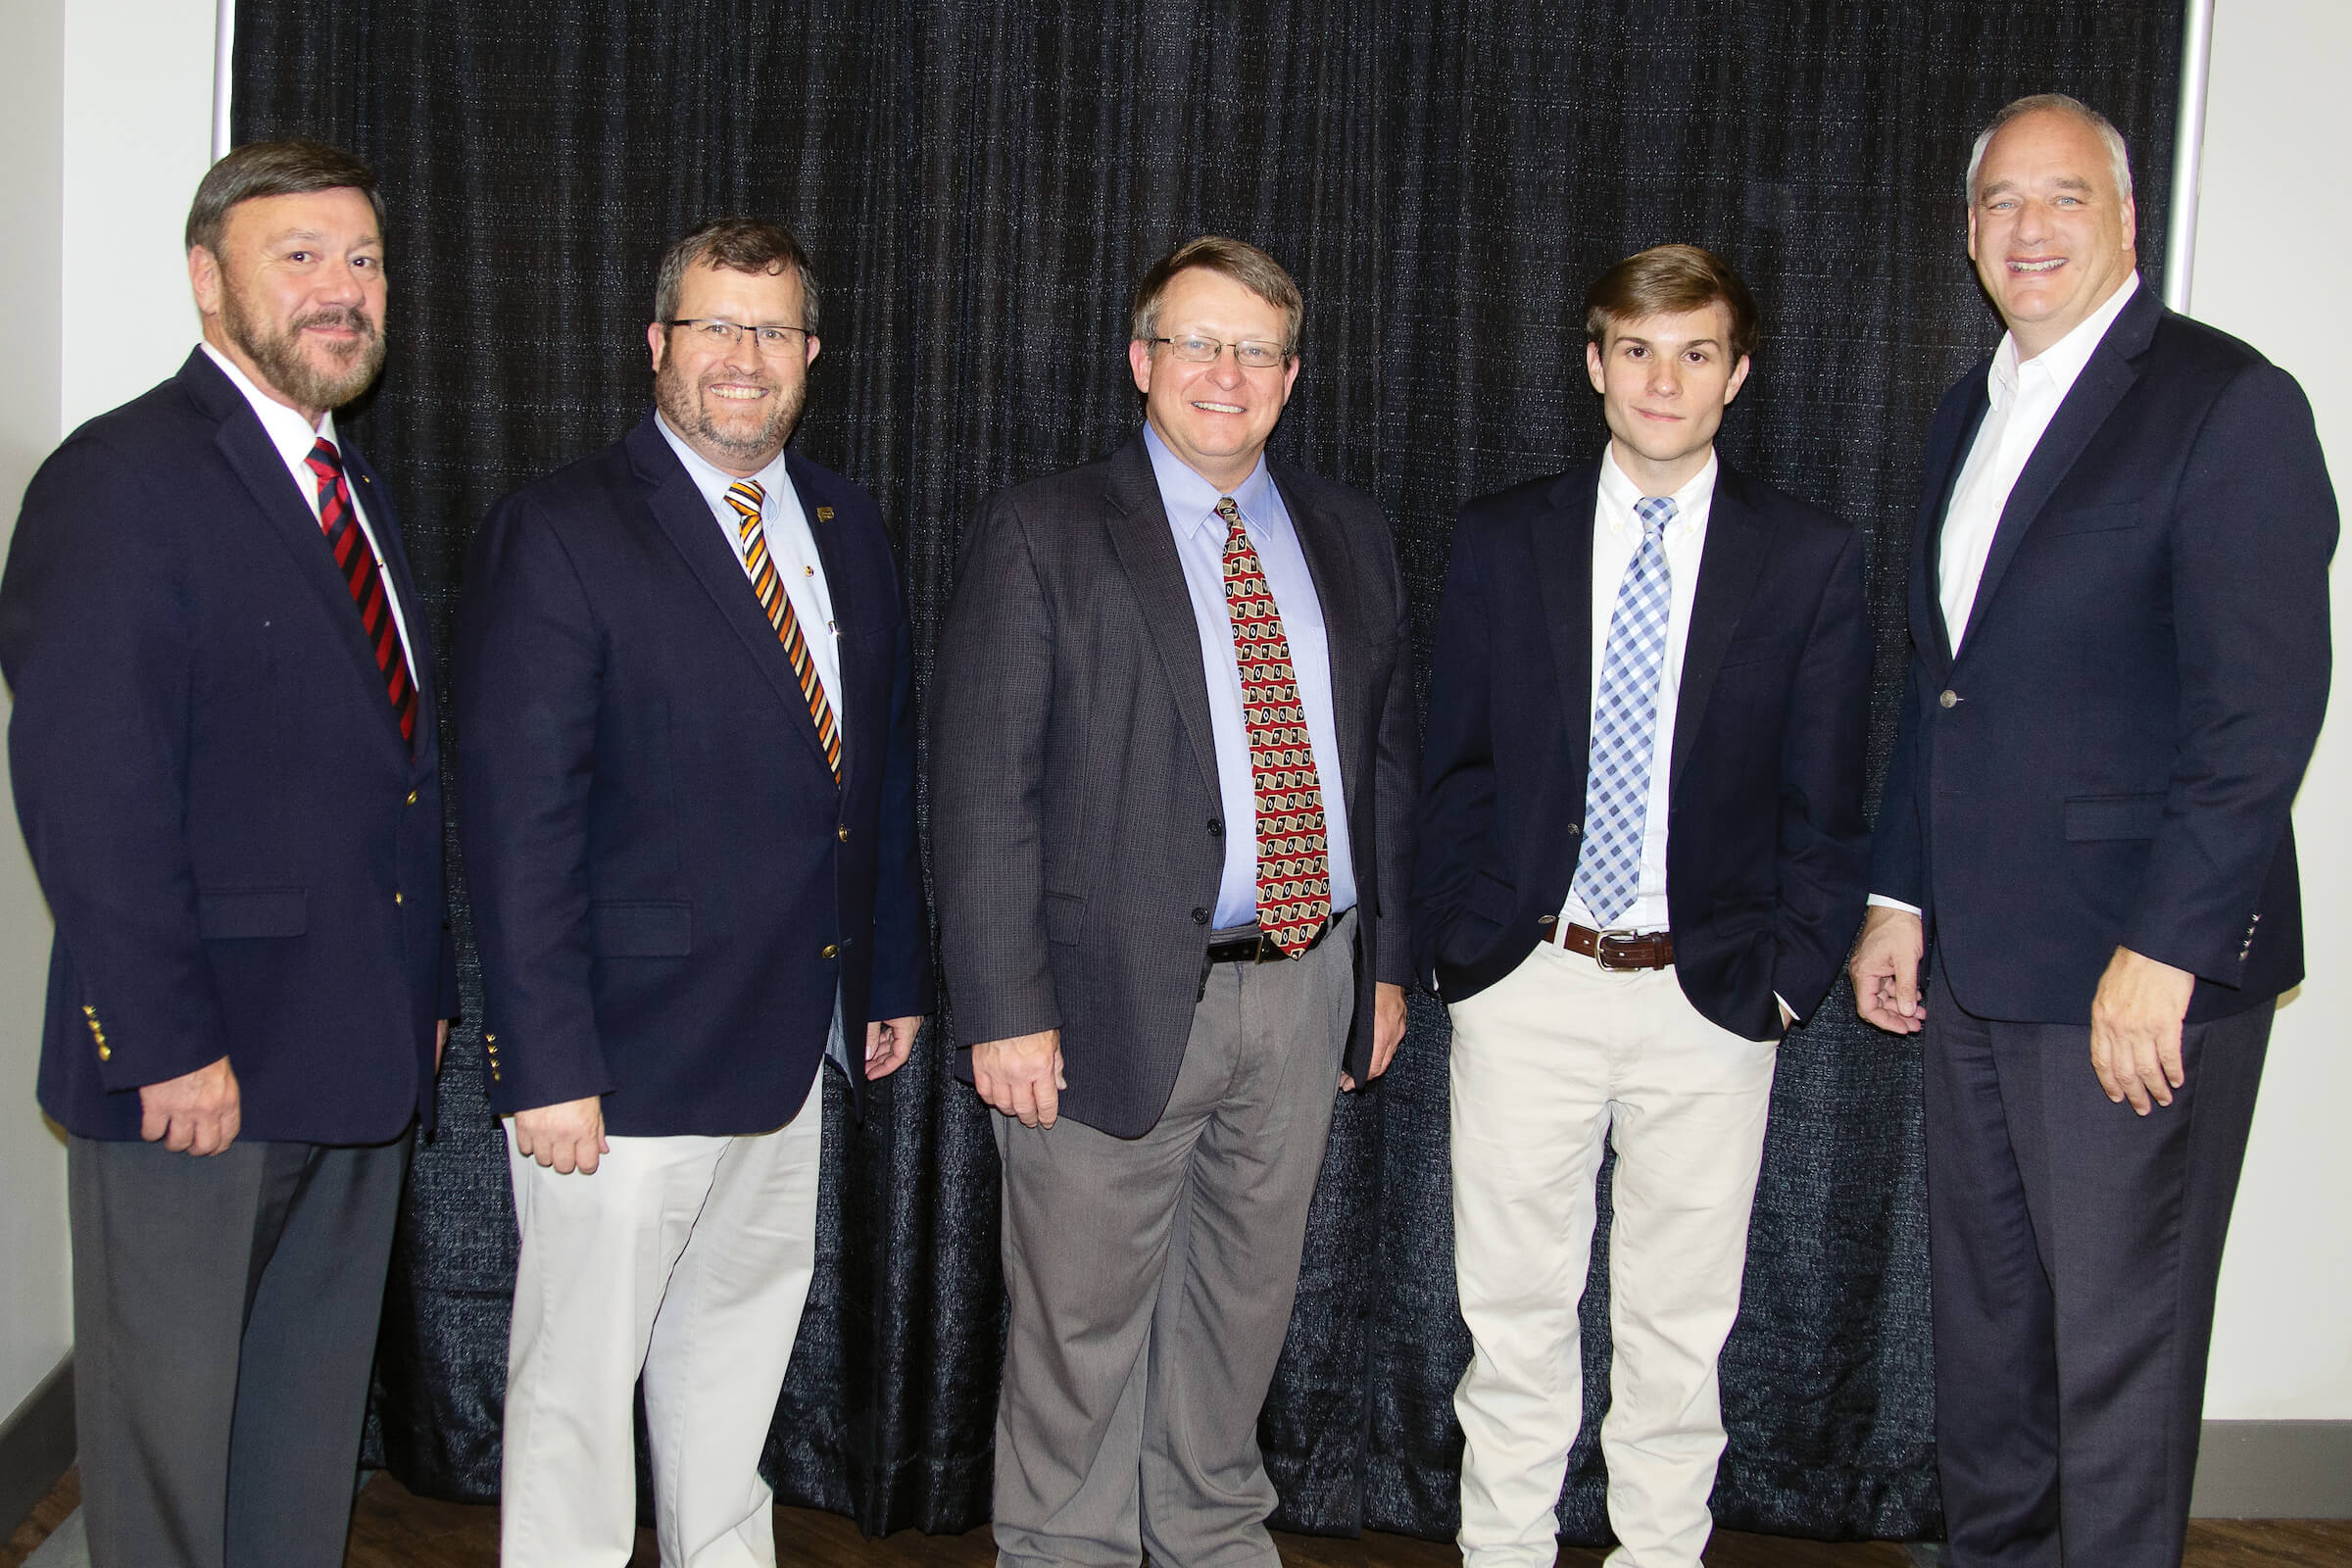 McNairy County resident and Tennessee Commissioner of Agriculture Jai Templeton (center) is pictured Dec. 5 following his induction into the UT Martin chapter of the Alpha Gamma Rho Fraternity. Also pictured (from left) are Marvin Flatt, fraternity adviser and director, Career Technical Education, Weakley County Schools; Dr. Todd Winters, fraternity adviser and dean, UT Martin College of Agriculture and Applied Sciences; Matthew Edmaiston, of Union City, Alpha Gamma Rho chapter president; and Dr. Charley Deal, executive director, WestStar Leadership Program. Templeton is a 1999 WestStar graduate.